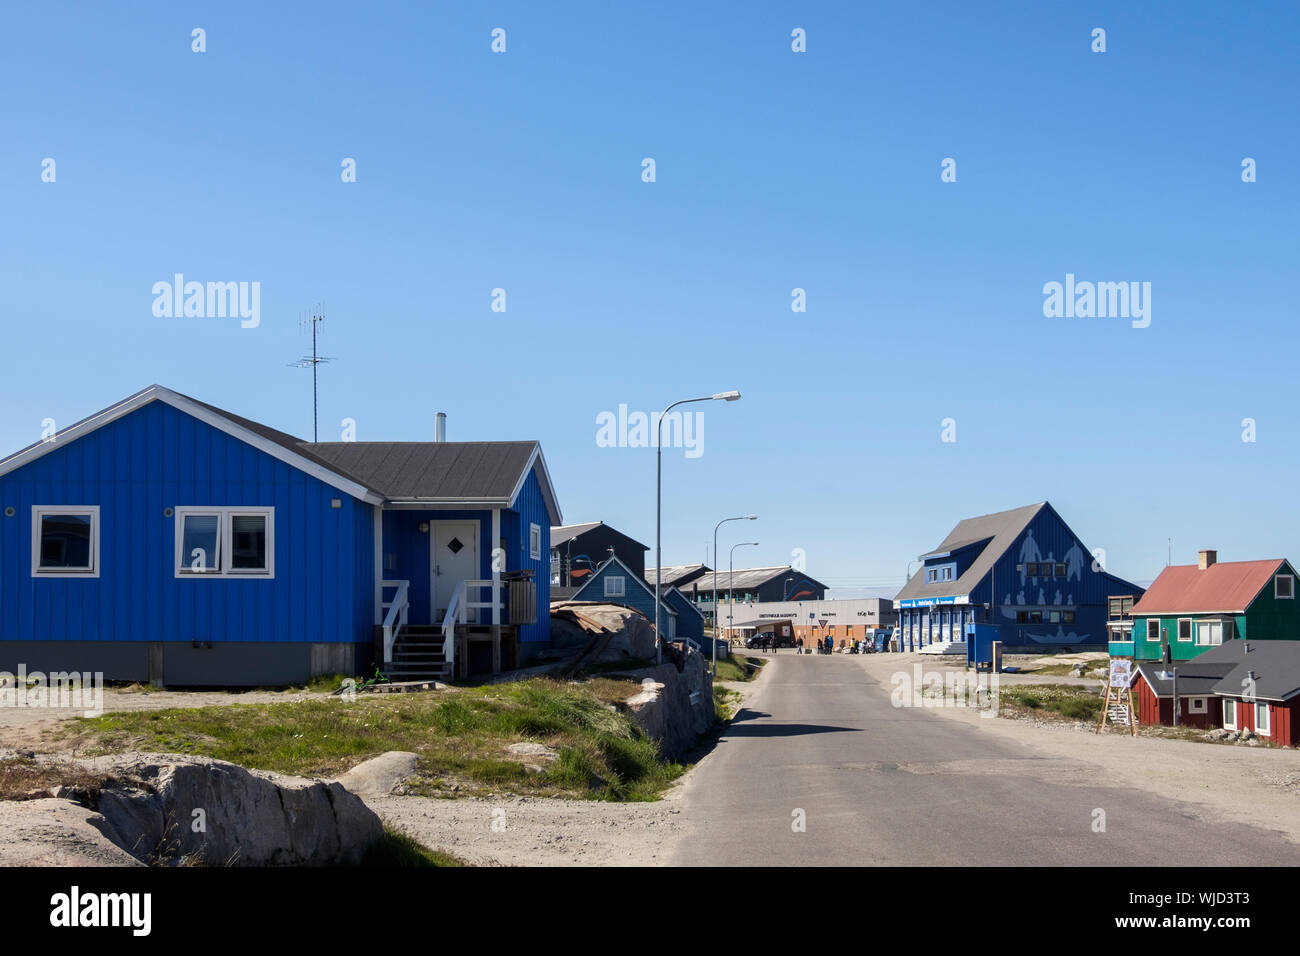 Typical wooden houses on street leading to town and Tourist Information centre. Ilulissat (Jakobshavn), Qaasuitsup, Greenland Stock Photo